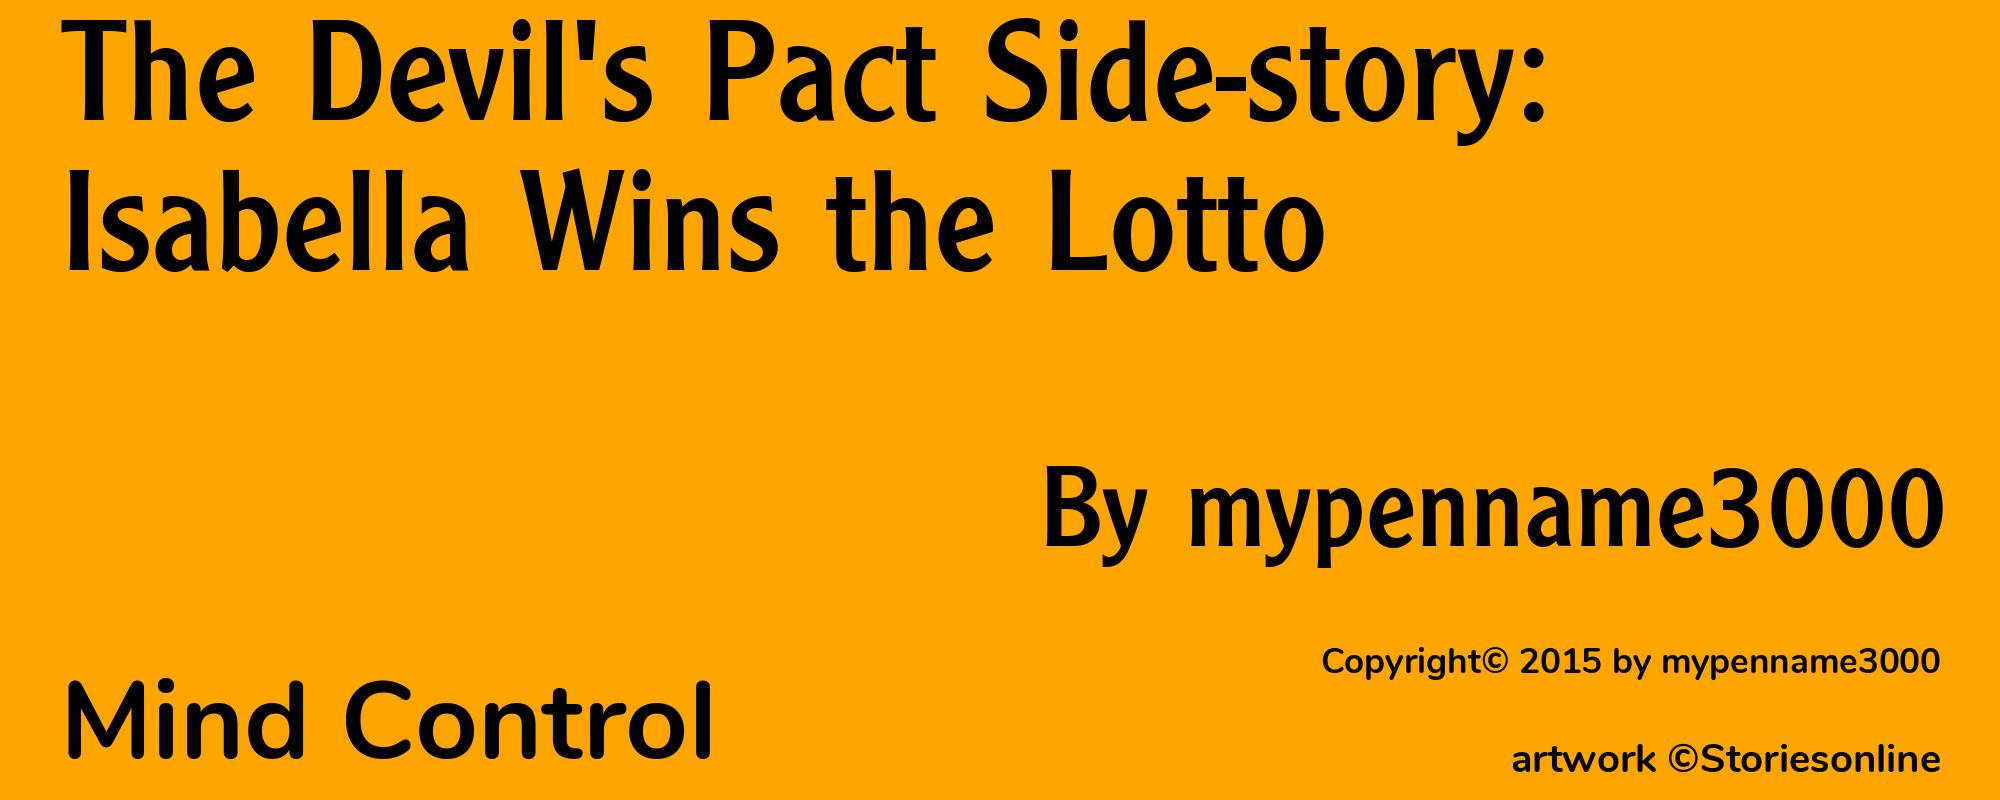 The Devil's Pact Side-story: Isabella Wins the Lotto - Cover